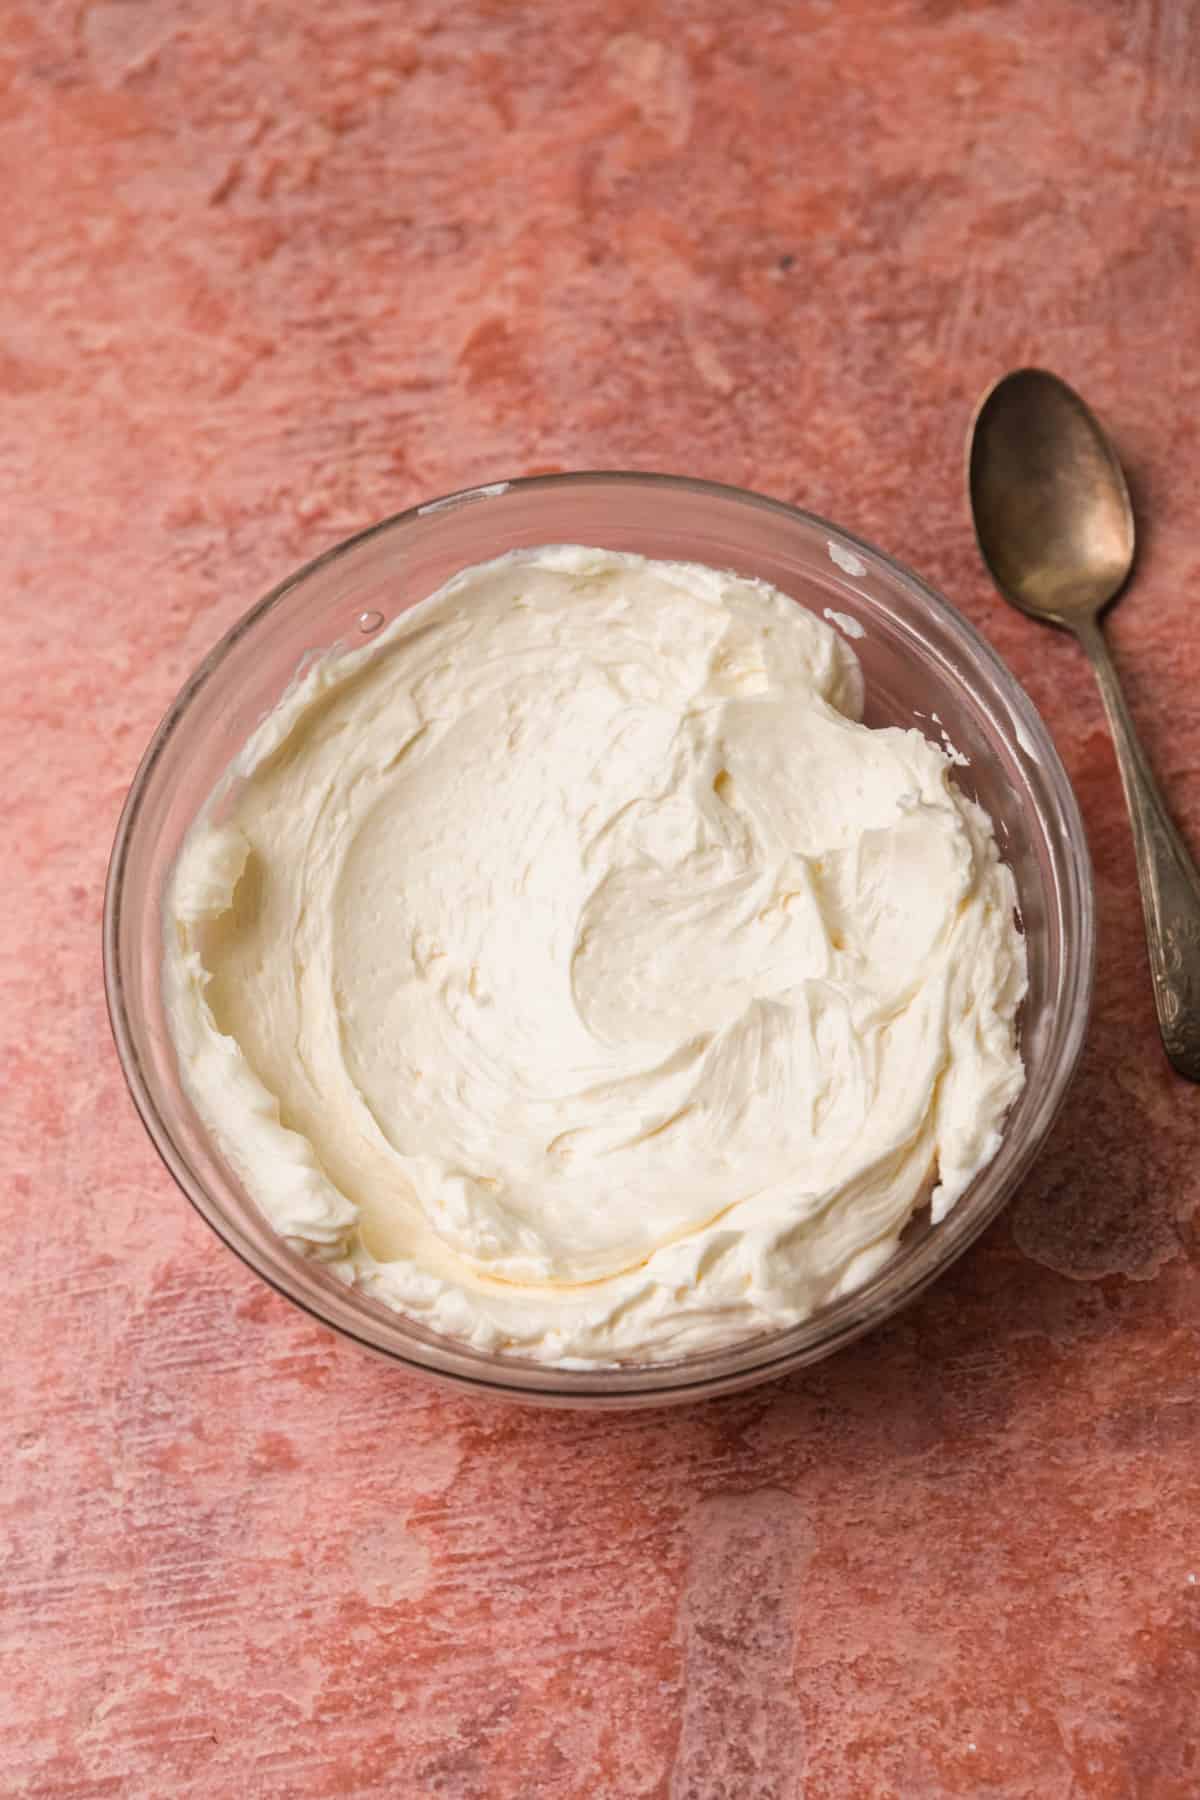 Faux Swiss meringue buttercream in a bowl with a spoon.